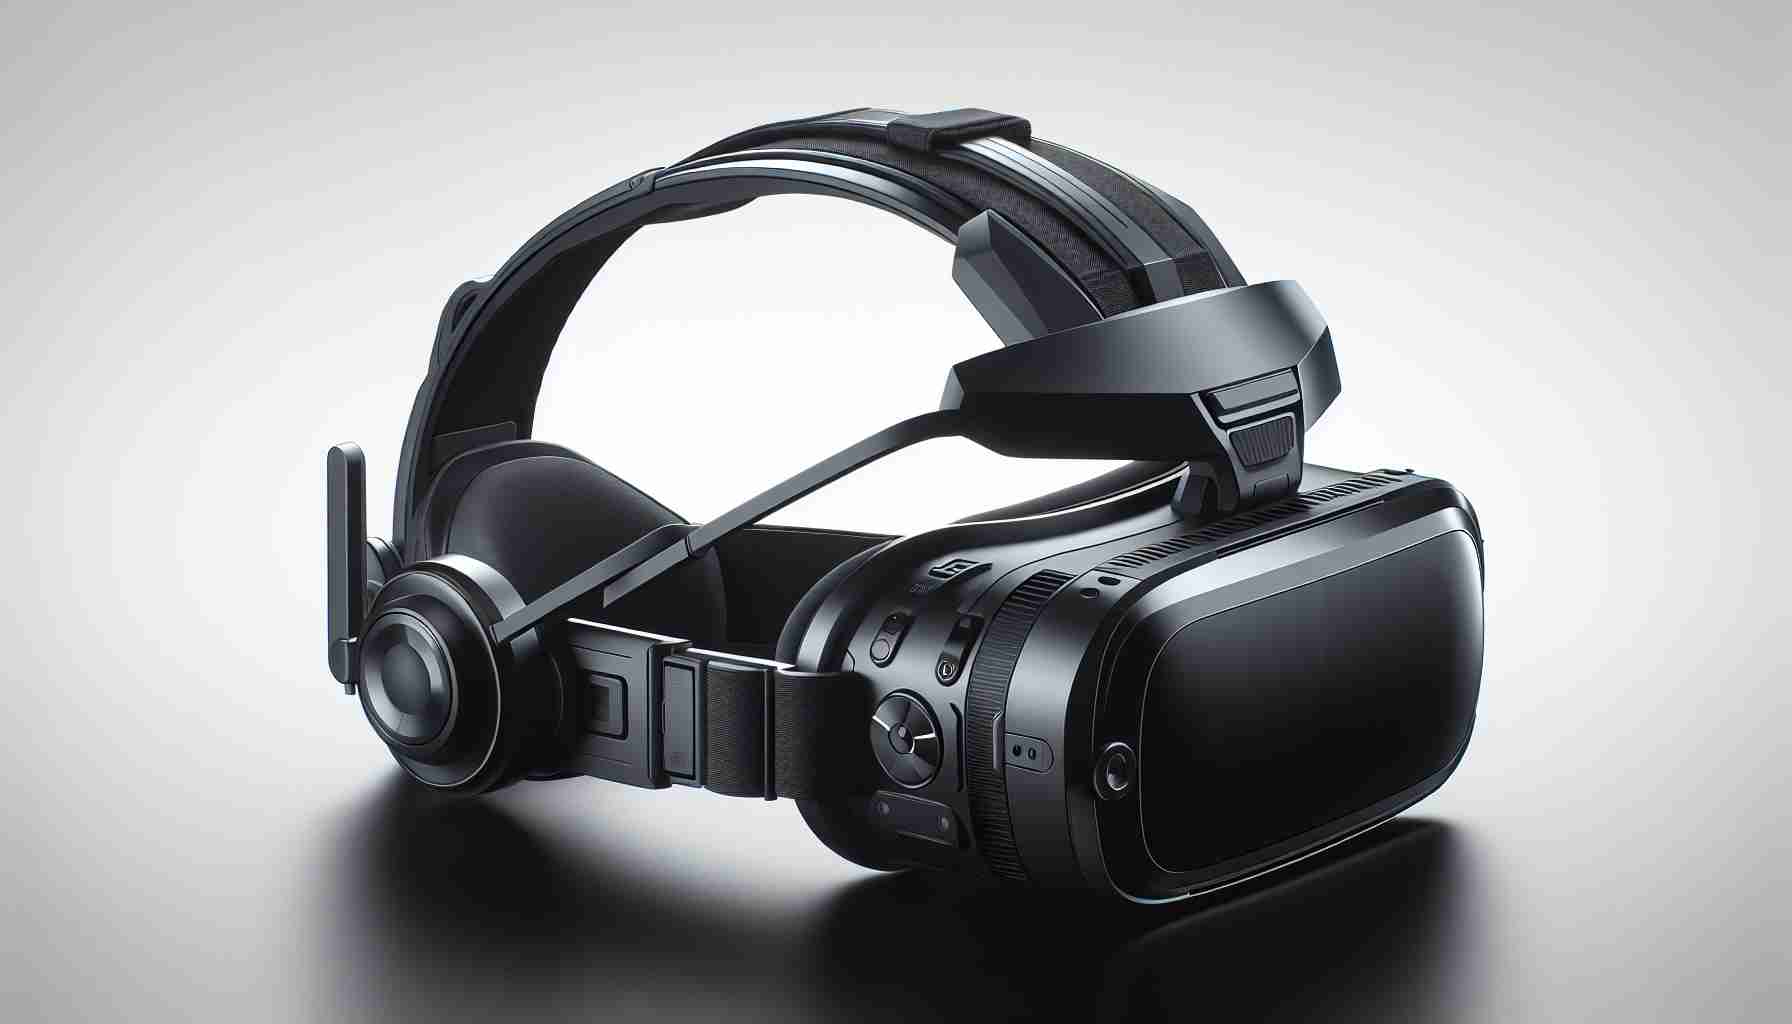 Introducing the Versatile VRx Headset